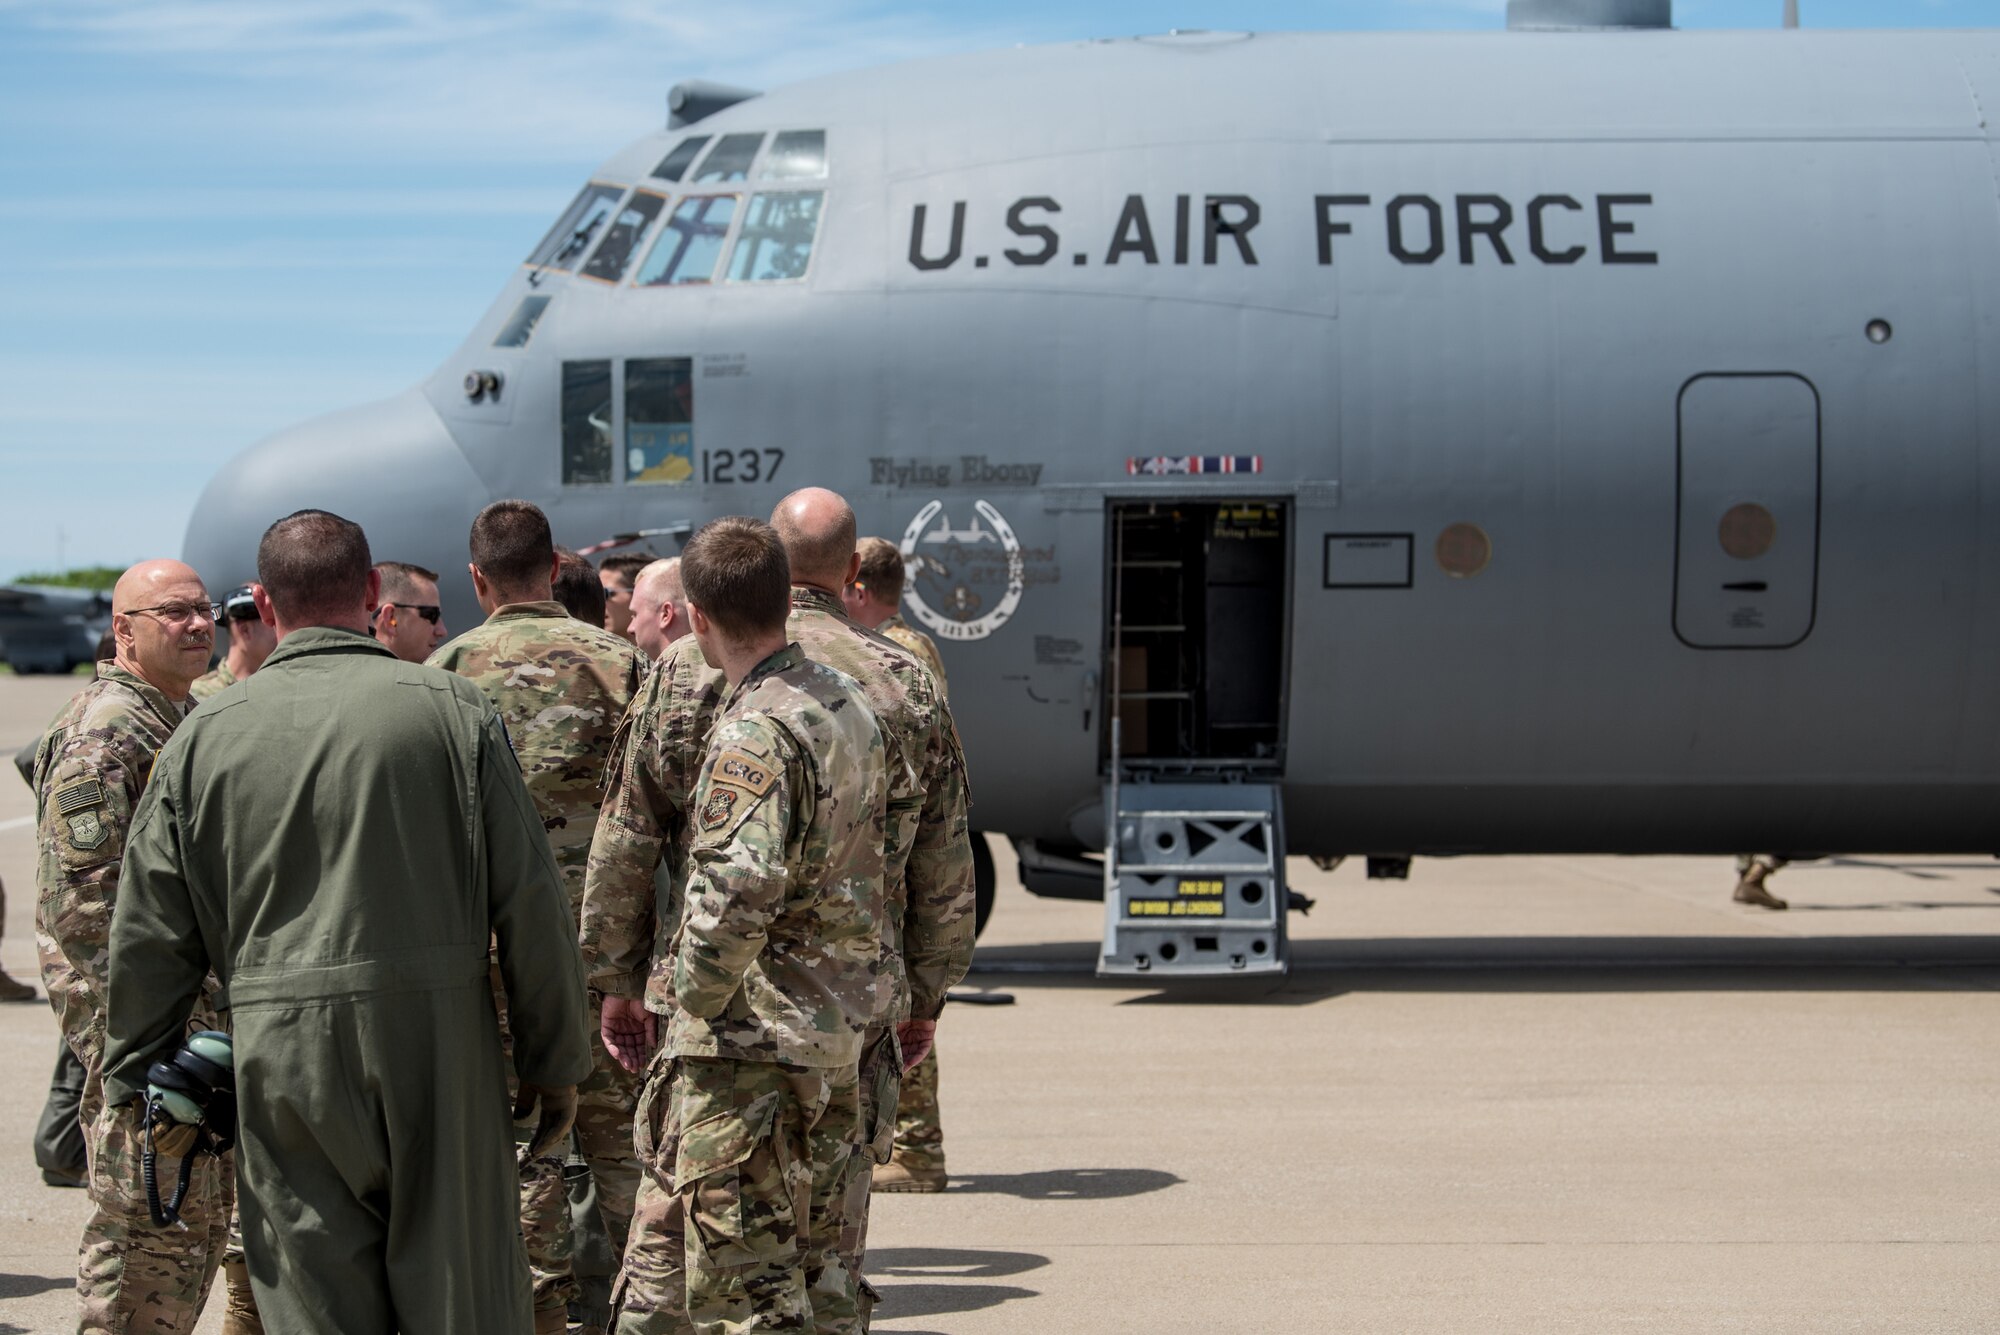 Two C-130 Hercules aircraft and more than 30 Airmen from the Kentucky Air Guard’s 123rd Airlift Wing arrive at the Kentucky Air National Guard Base in Louisville, Ky., June 11, 2019, after participating in a week-long event in France for the 75th anniversary of D-Day. The D-Day invasion, formally known as Operation Overlord, turned the tide of World War II in the European theater. (U.S. Air National Guard photo by Staff Sgt. Joshua Horton)